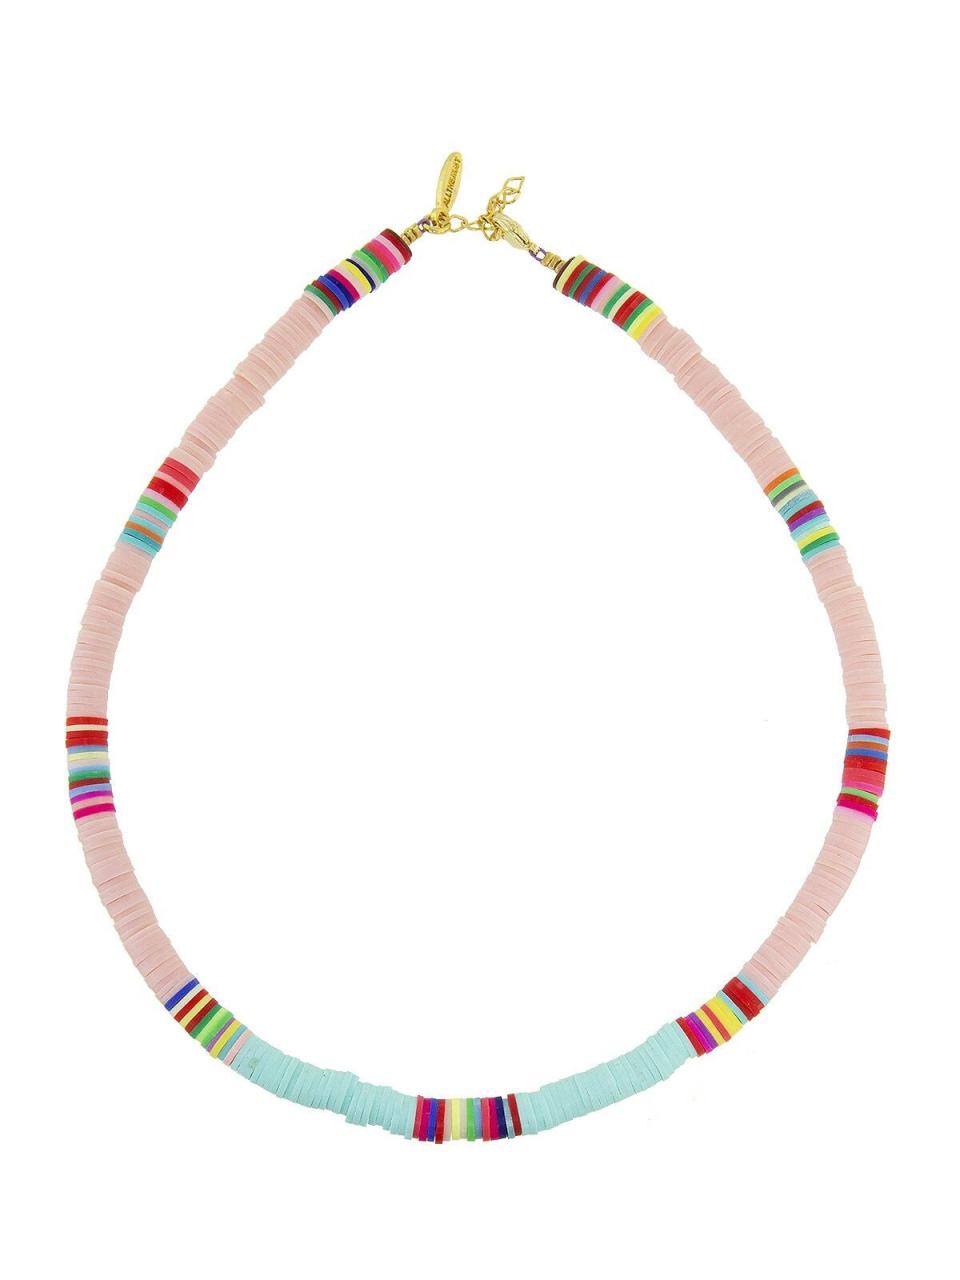 21) Light Pink and Light Blue Heishi Bead Yellow Gold Necklace